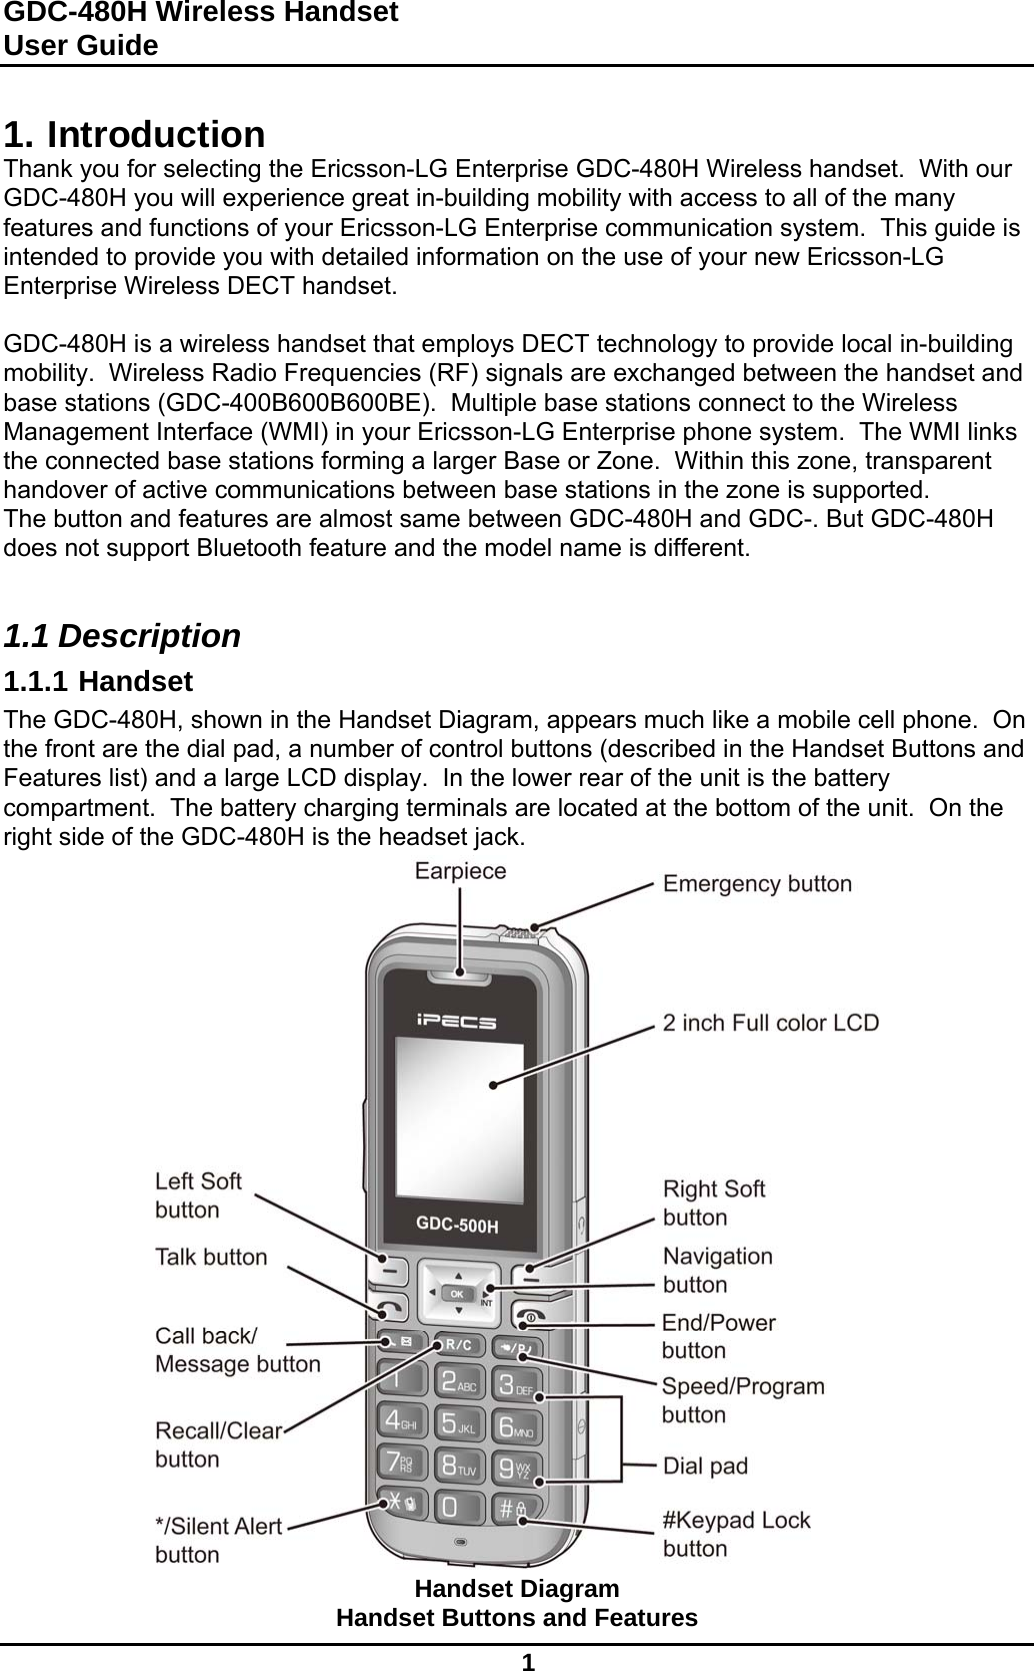 GDC-480H Wireless Handset User Guide   1  1. Introduction Thank you for selecting the Ericsson-LG Enterprise GDC-480H Wireless handset.  With our GDC-480H you will experience great in-building mobility with access to all of the many features and functions of your Ericsson-LG Enterprise communication system.  This guide is intended to provide you with detailed information on the use of your new Ericsson-LG Enterprise Wireless DECT handset.  GDC-480H is a wireless handset that employs DECT technology to provide local in-building mobility.  Wireless Radio Frequencies (RF) signals are exchanged between the handset and base stations (GDC-400B600B600BE).  Multiple base stations connect to the Wireless Management Interface (WMI) in your Ericsson-LG Enterprise phone system.  The WMI links the connected base stations forming a larger Base or Zone.  Within this zone, transparent handover of active communications between base stations in the zone is supported. The button and features are almost same between GDC-480H and GDC-. But GDC-480H does not support Bluetooth feature and the model name is different.  1.1 Description 1.1.1 Handset The GDC-480H, shown in the Handset Diagram, appears much like a mobile cell phone.  On the front are the dial pad, a number of control buttons (described in the Handset Buttons and Features list) and a large LCD display.  In the lower rear of the unit is the battery compartment.  The battery charging terminals are located at the bottom of the unit.  On the right side of the GDC-480H is the headset jack.                               Handset Diagram Handset Buttons and Features 